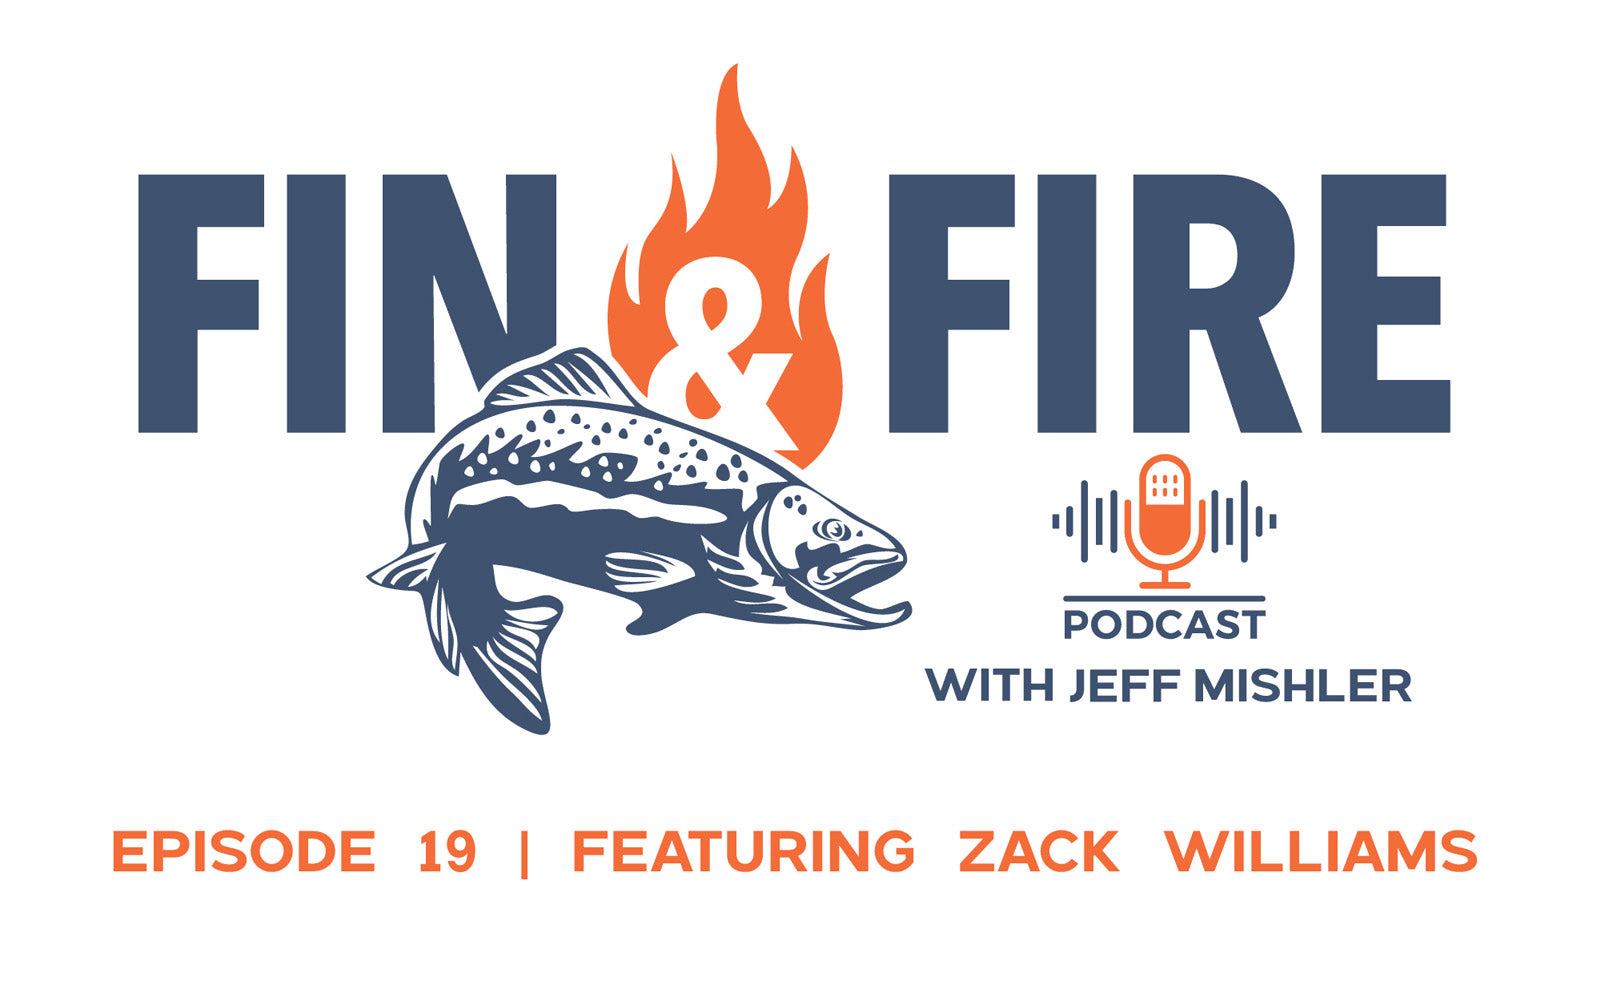 Episode 19 Featuring Zack Williams---Publisher, Editor, Hunter, Angler, Spey Casting Expert